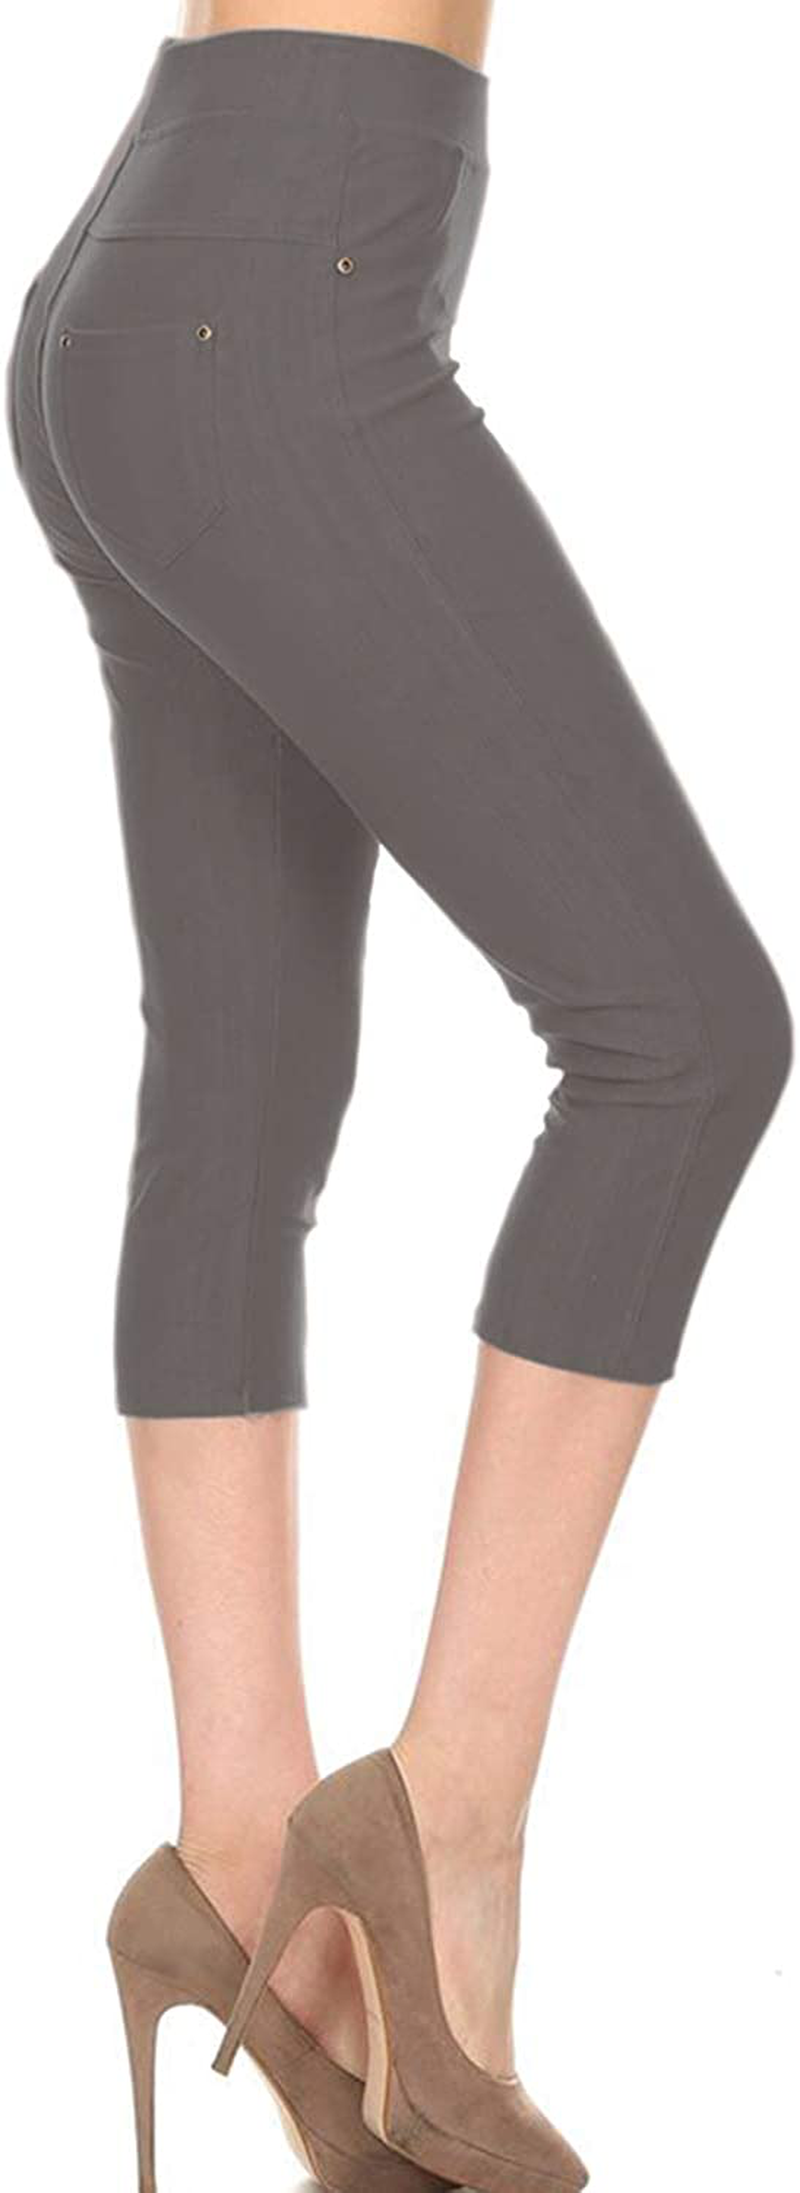 Leggings Depot Premium Quality Women's Cotton Blend Stretch Pull-on Jeggings with Pockets